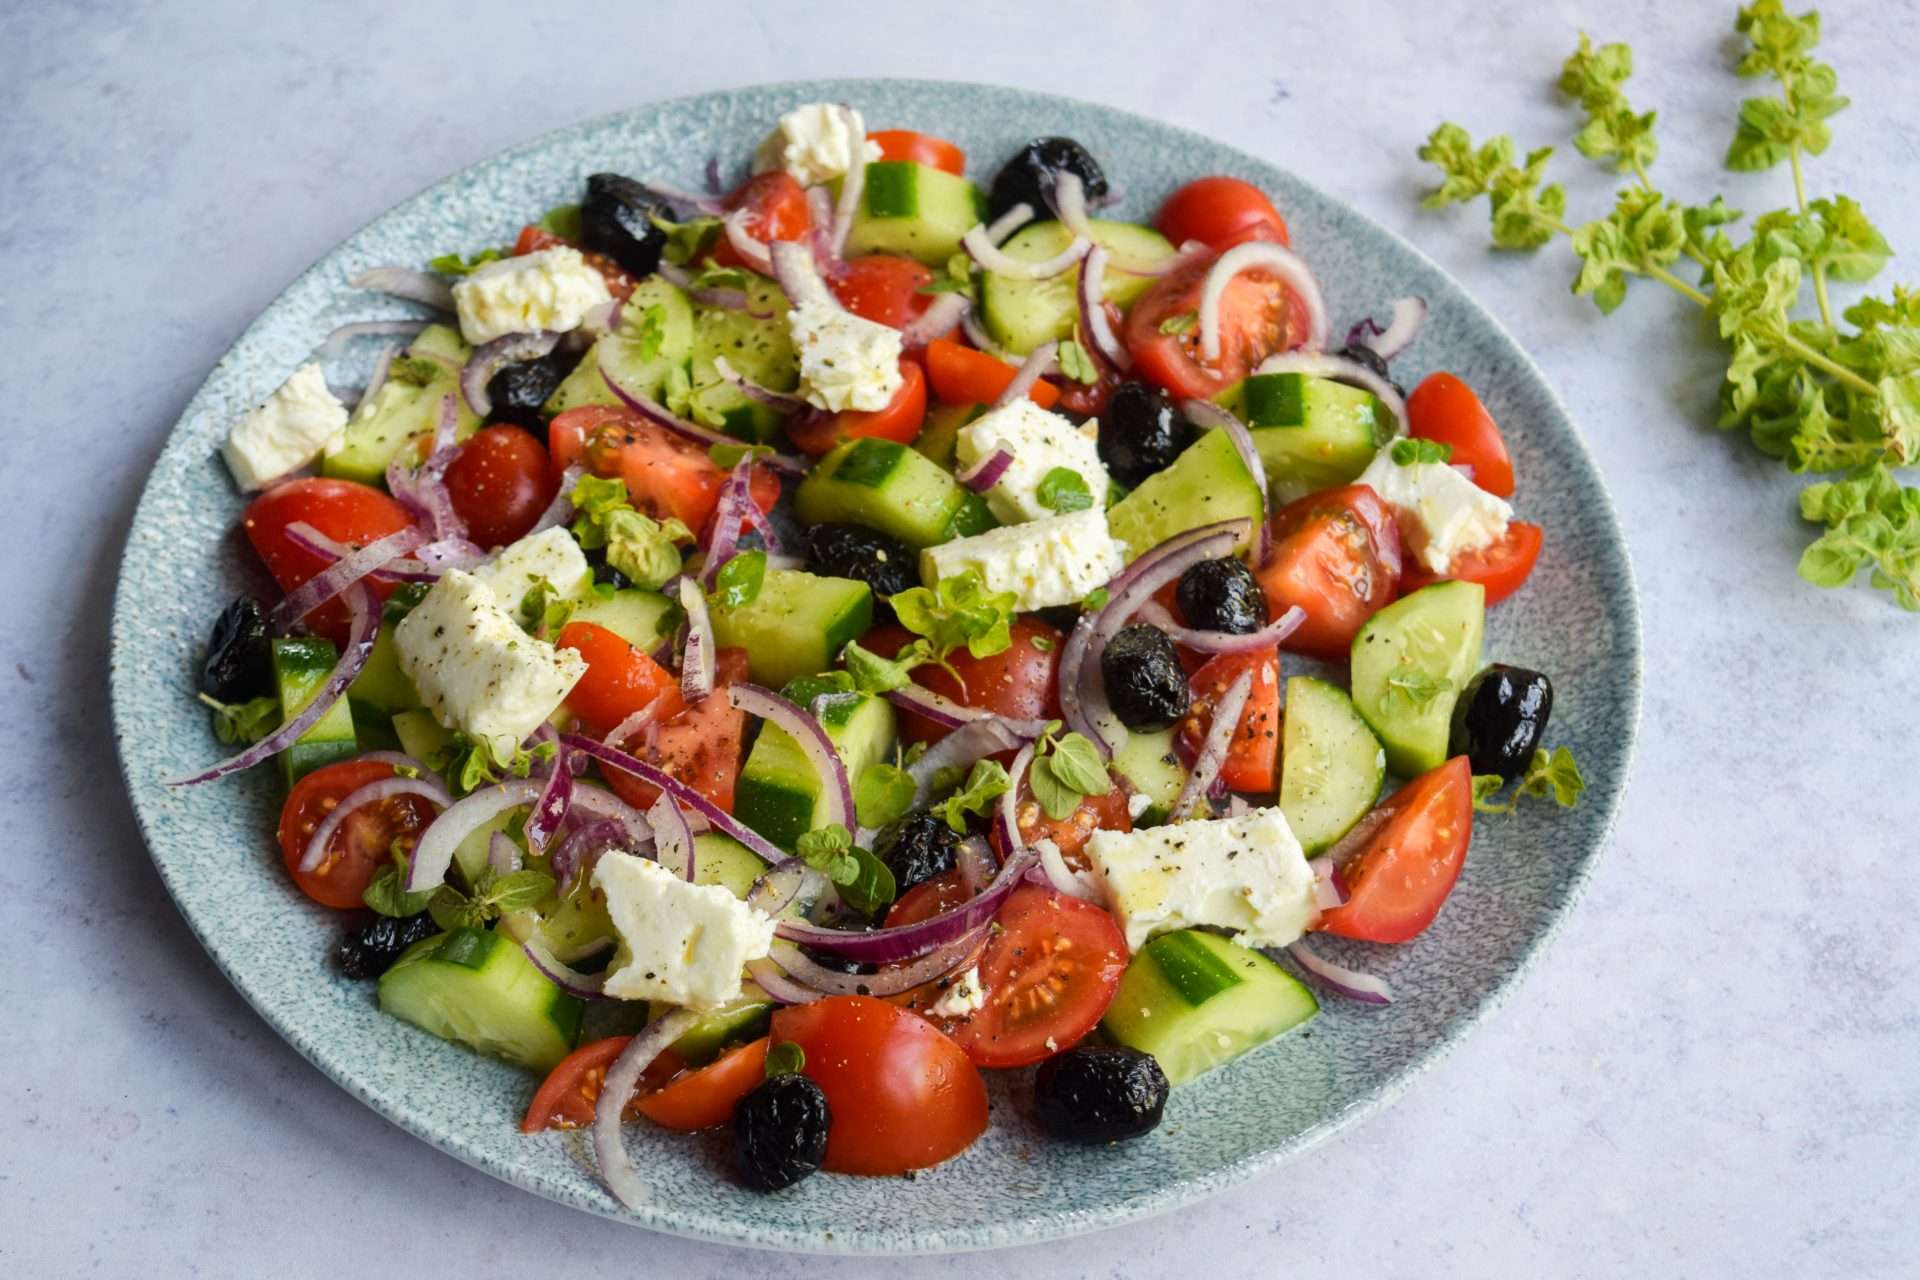 Recipe: How To Make The Perfect Greek Salad